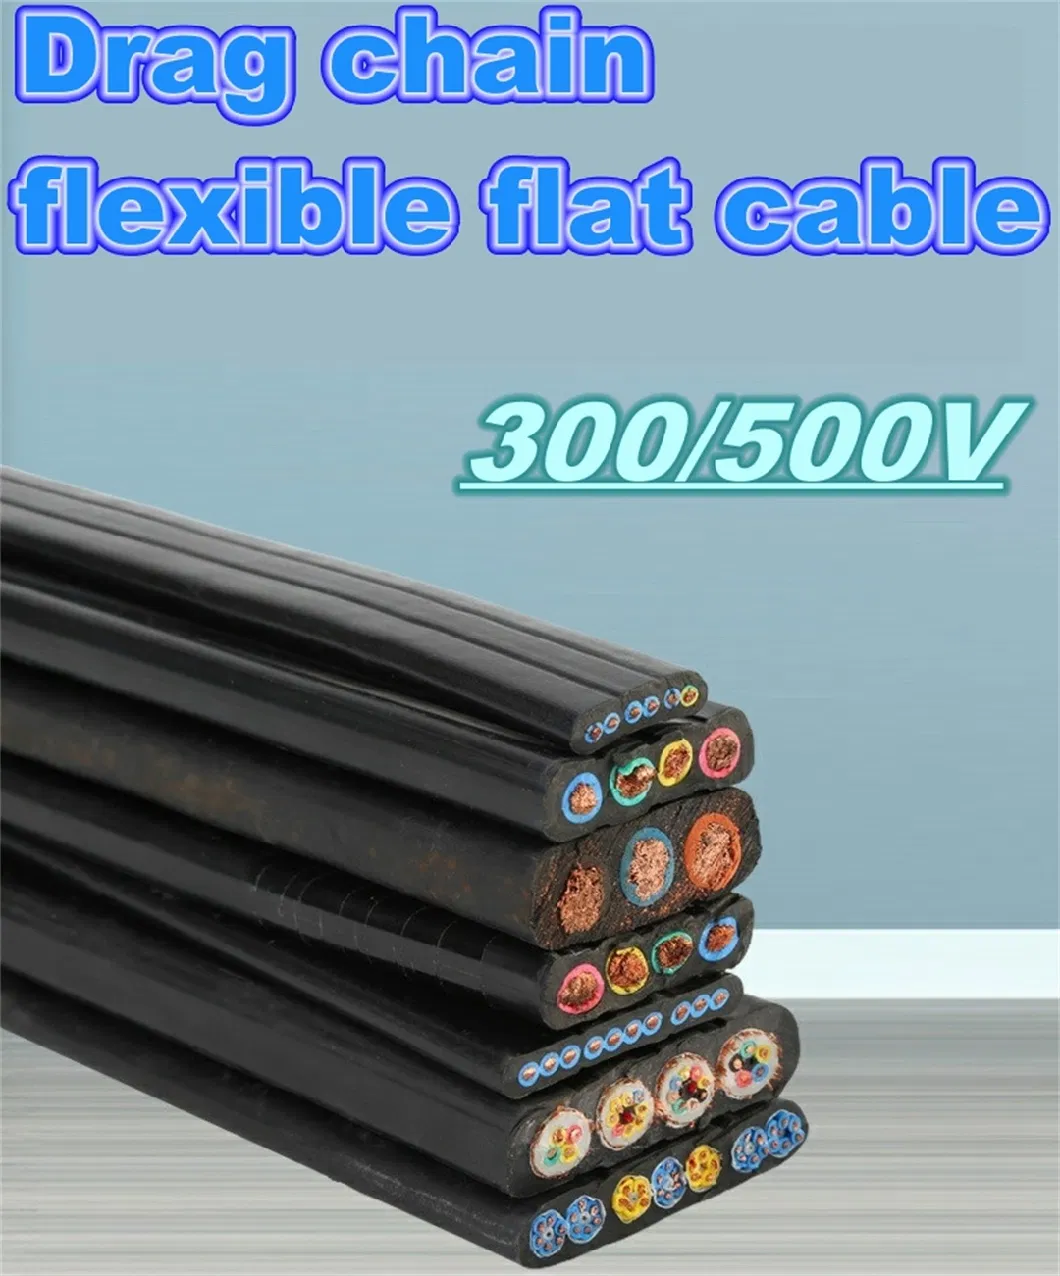 Yffb 300/500V 0.5-25mm2 2-60 Cores Elevator Drag Chain Accompanying Flexible Cable